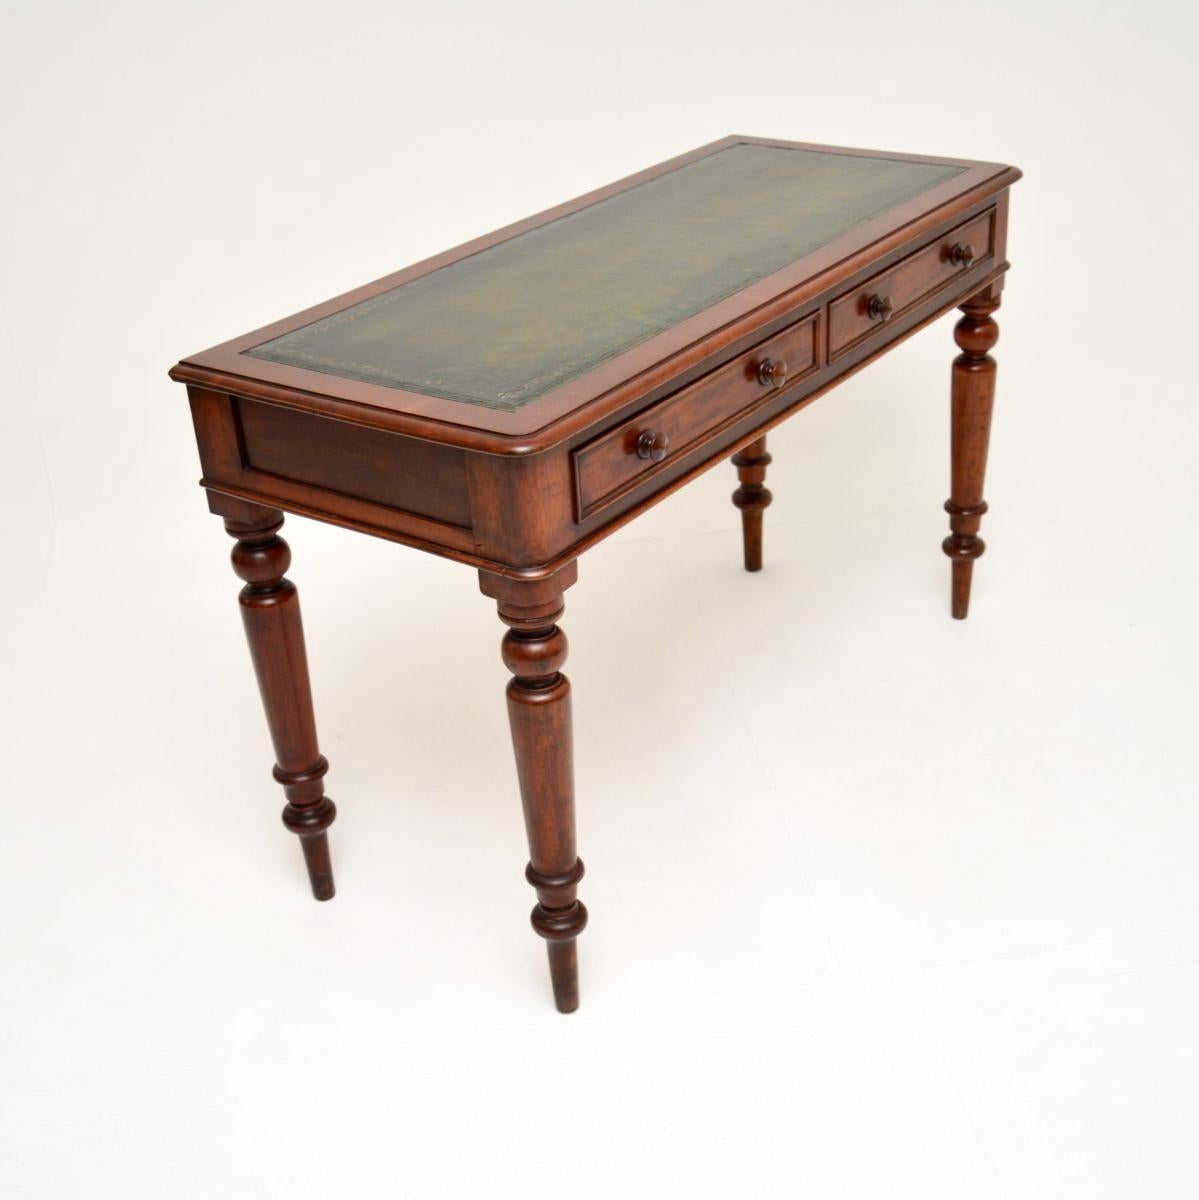 British Antique Victorian Writing Table / Desk For Sale